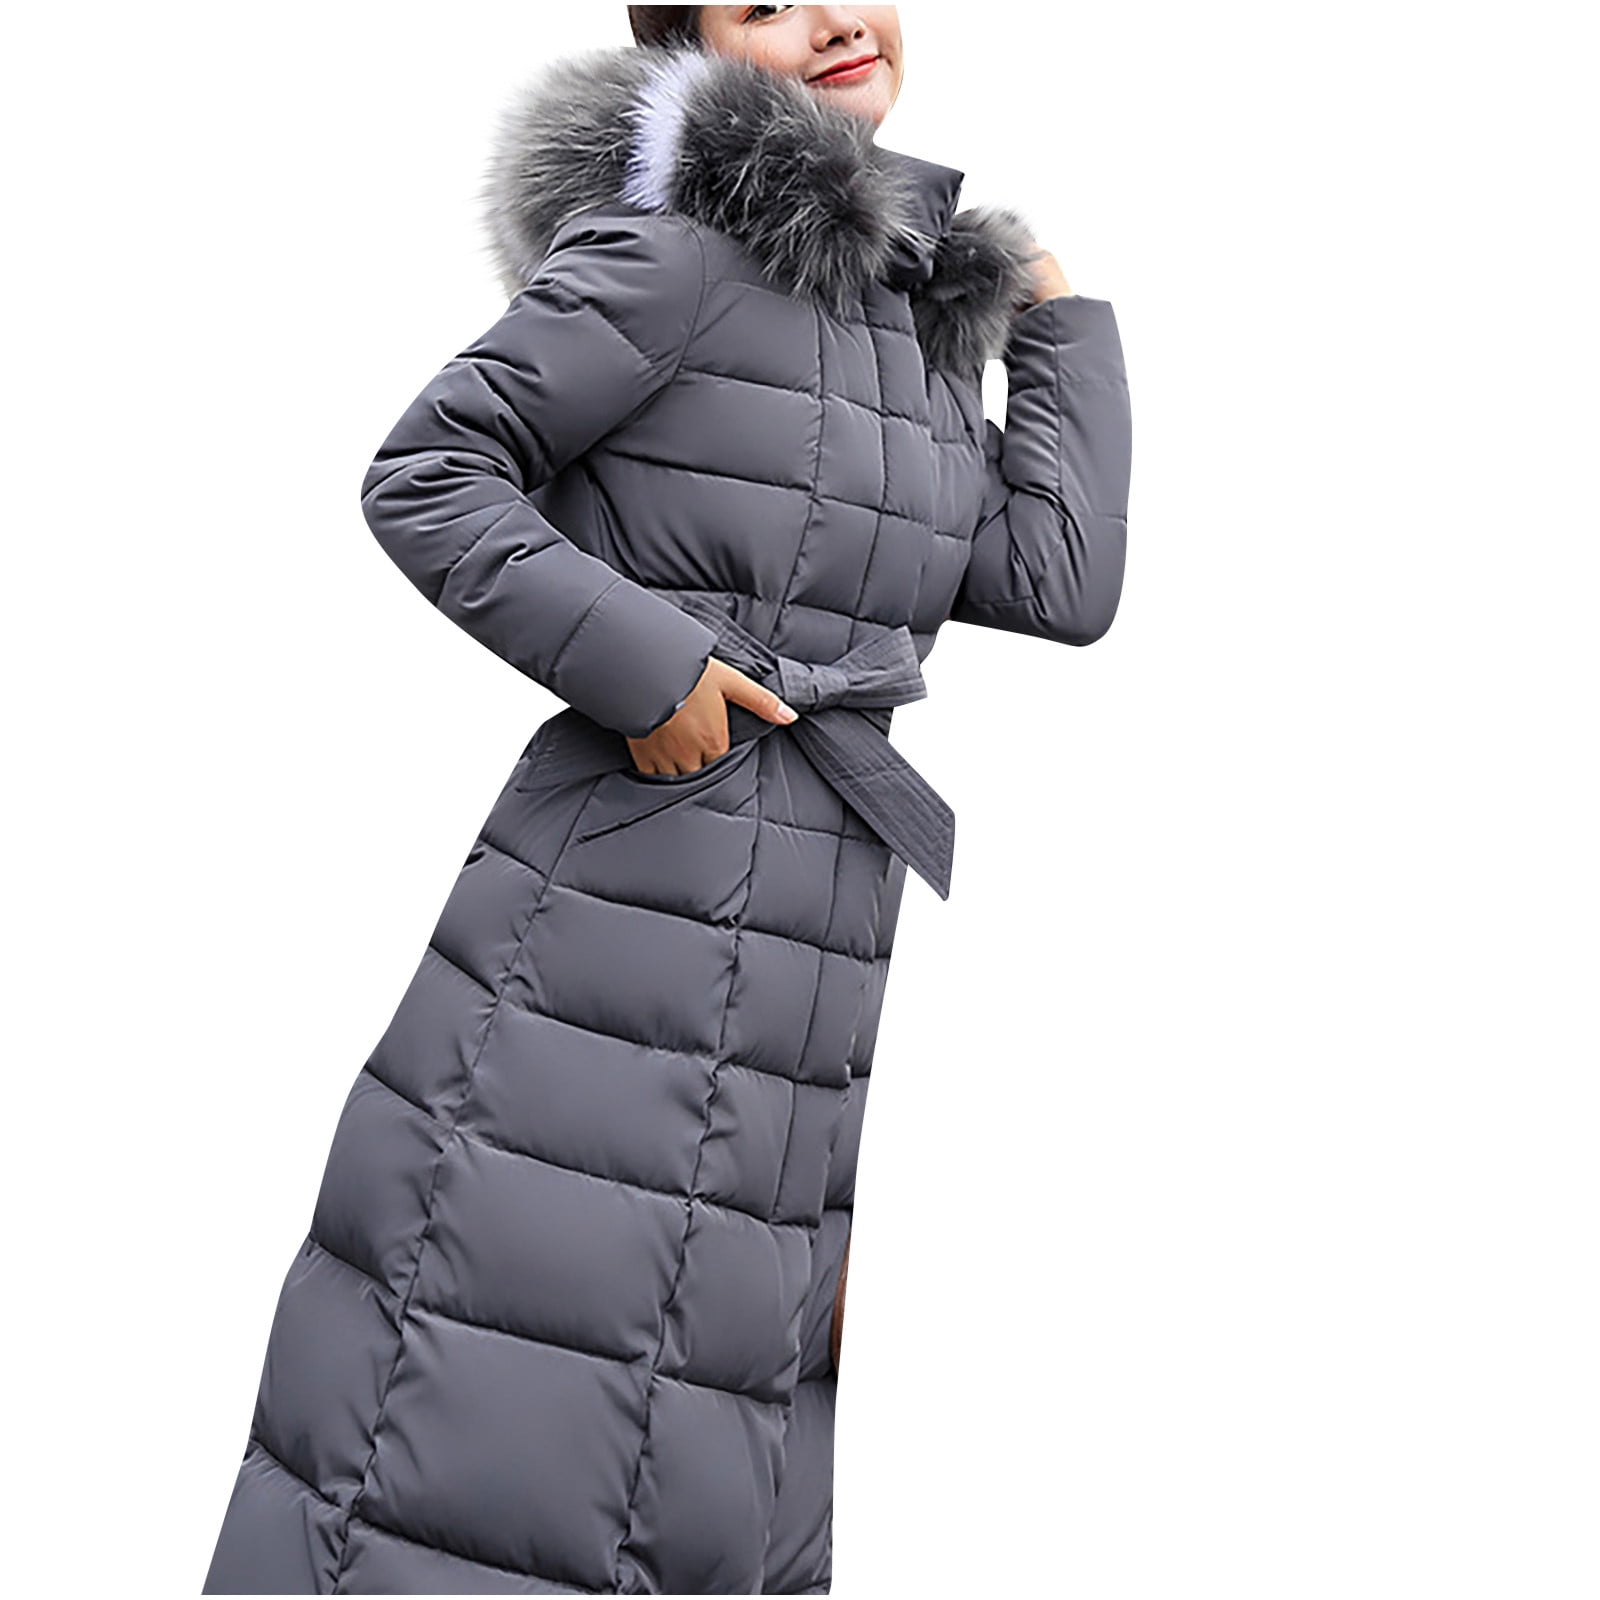 BVnarty Women's Jacket Coat Plus Size Solid Color Hooded Neck Long Sleeve  Plush Warm Gilet Long Vast Winter Fashion Top Shacket Jacket Casual  Lightweight Pink S 